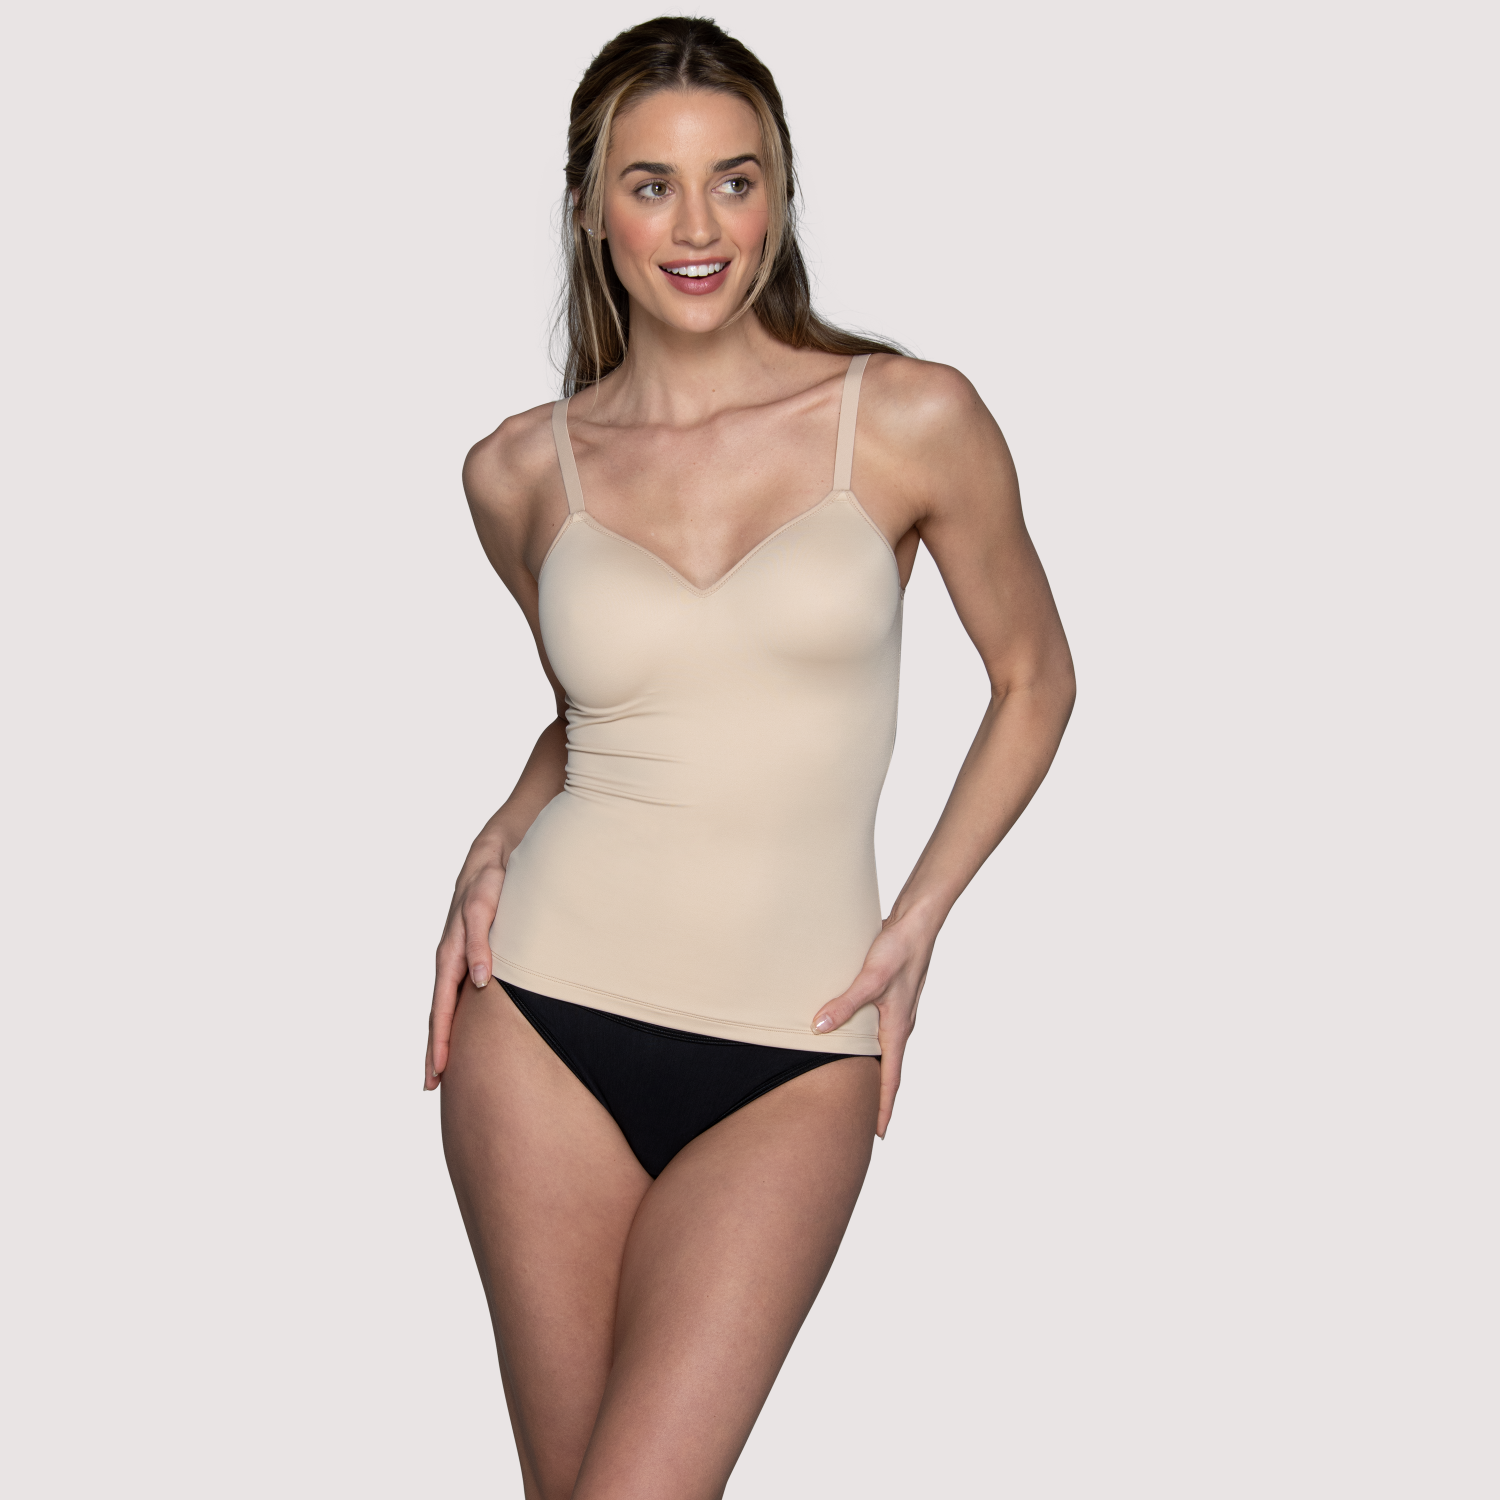 AIRism Bra Camisole made seamless for smooth comfort and a v-neck